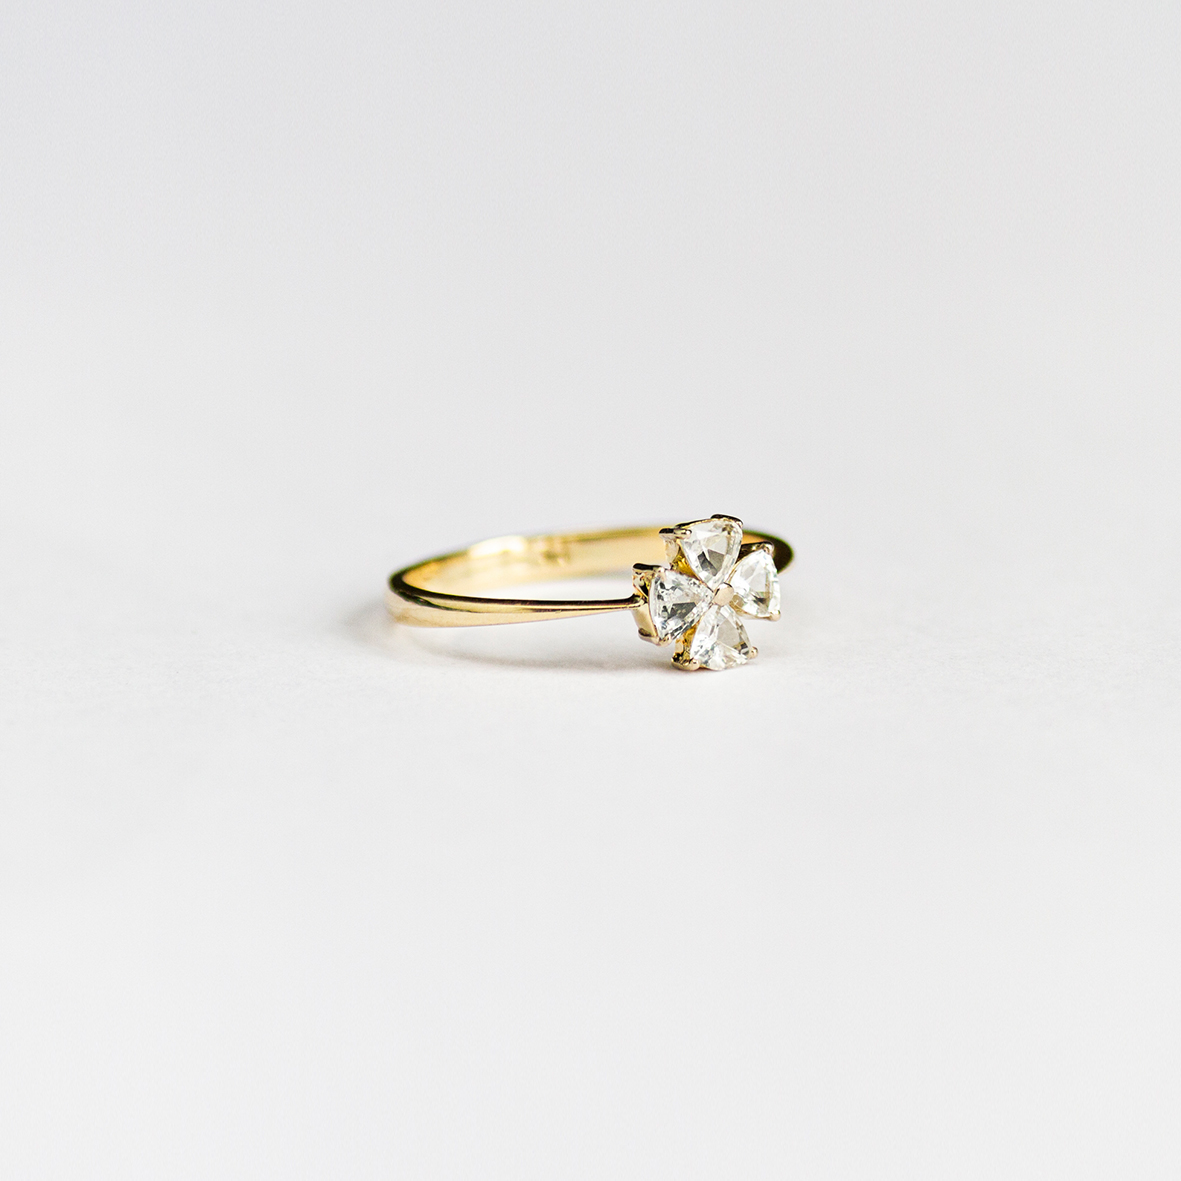 2. OONA_engagement_ficha2_sapphire clover ring